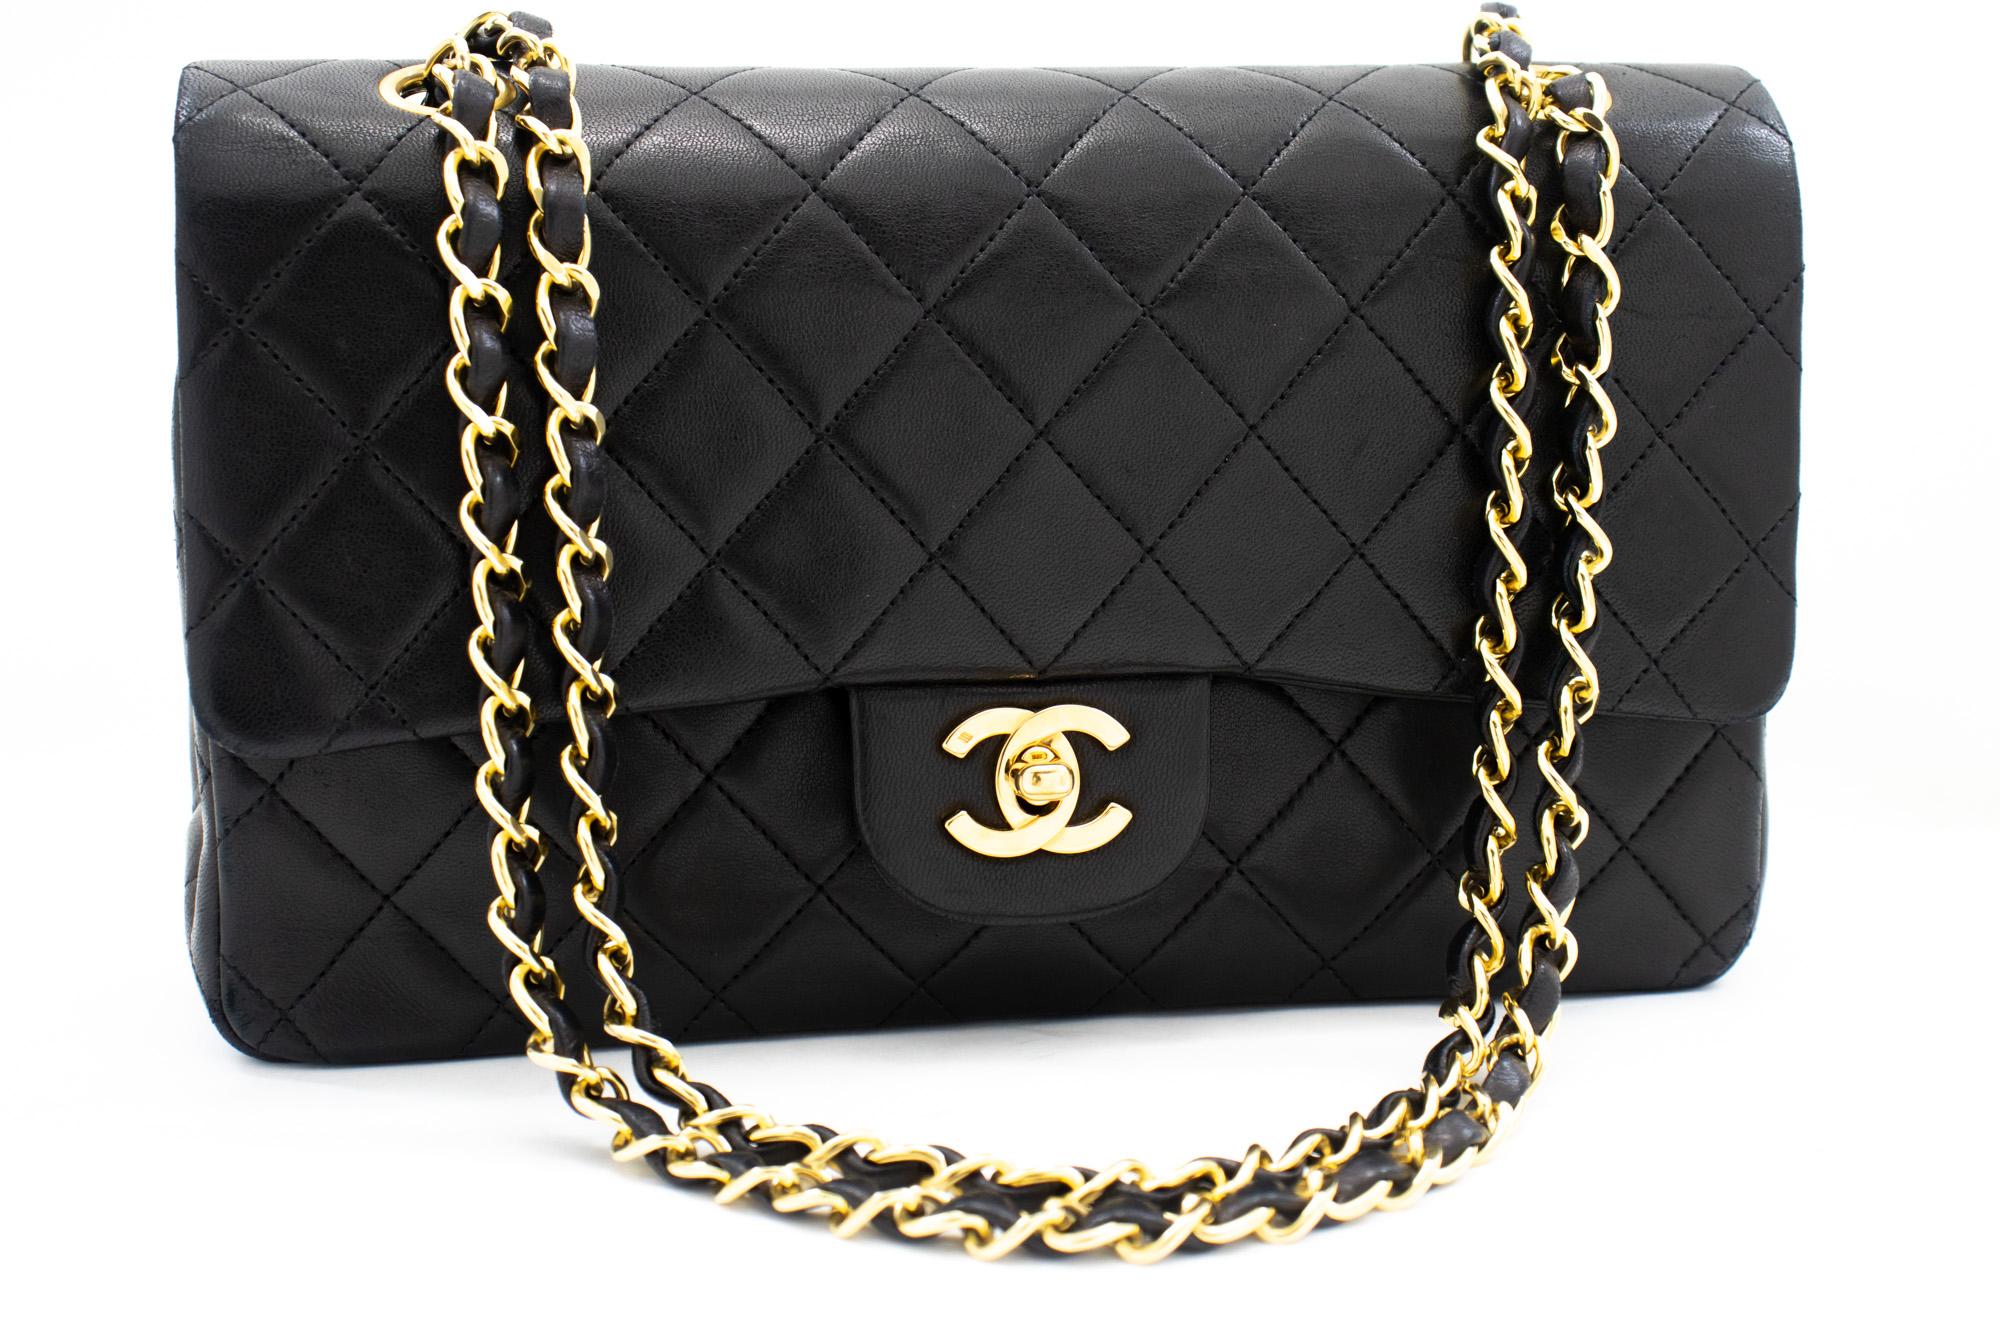 An authentic CHANEL Classic Double Flap Medium Chain Shoulder Bag Black Lamb. The color is Black. The outside material is Leather. The pattern is Solid. This item is Vintage / Classic. The year of manufacture would be 1989-1991.
Conditions &